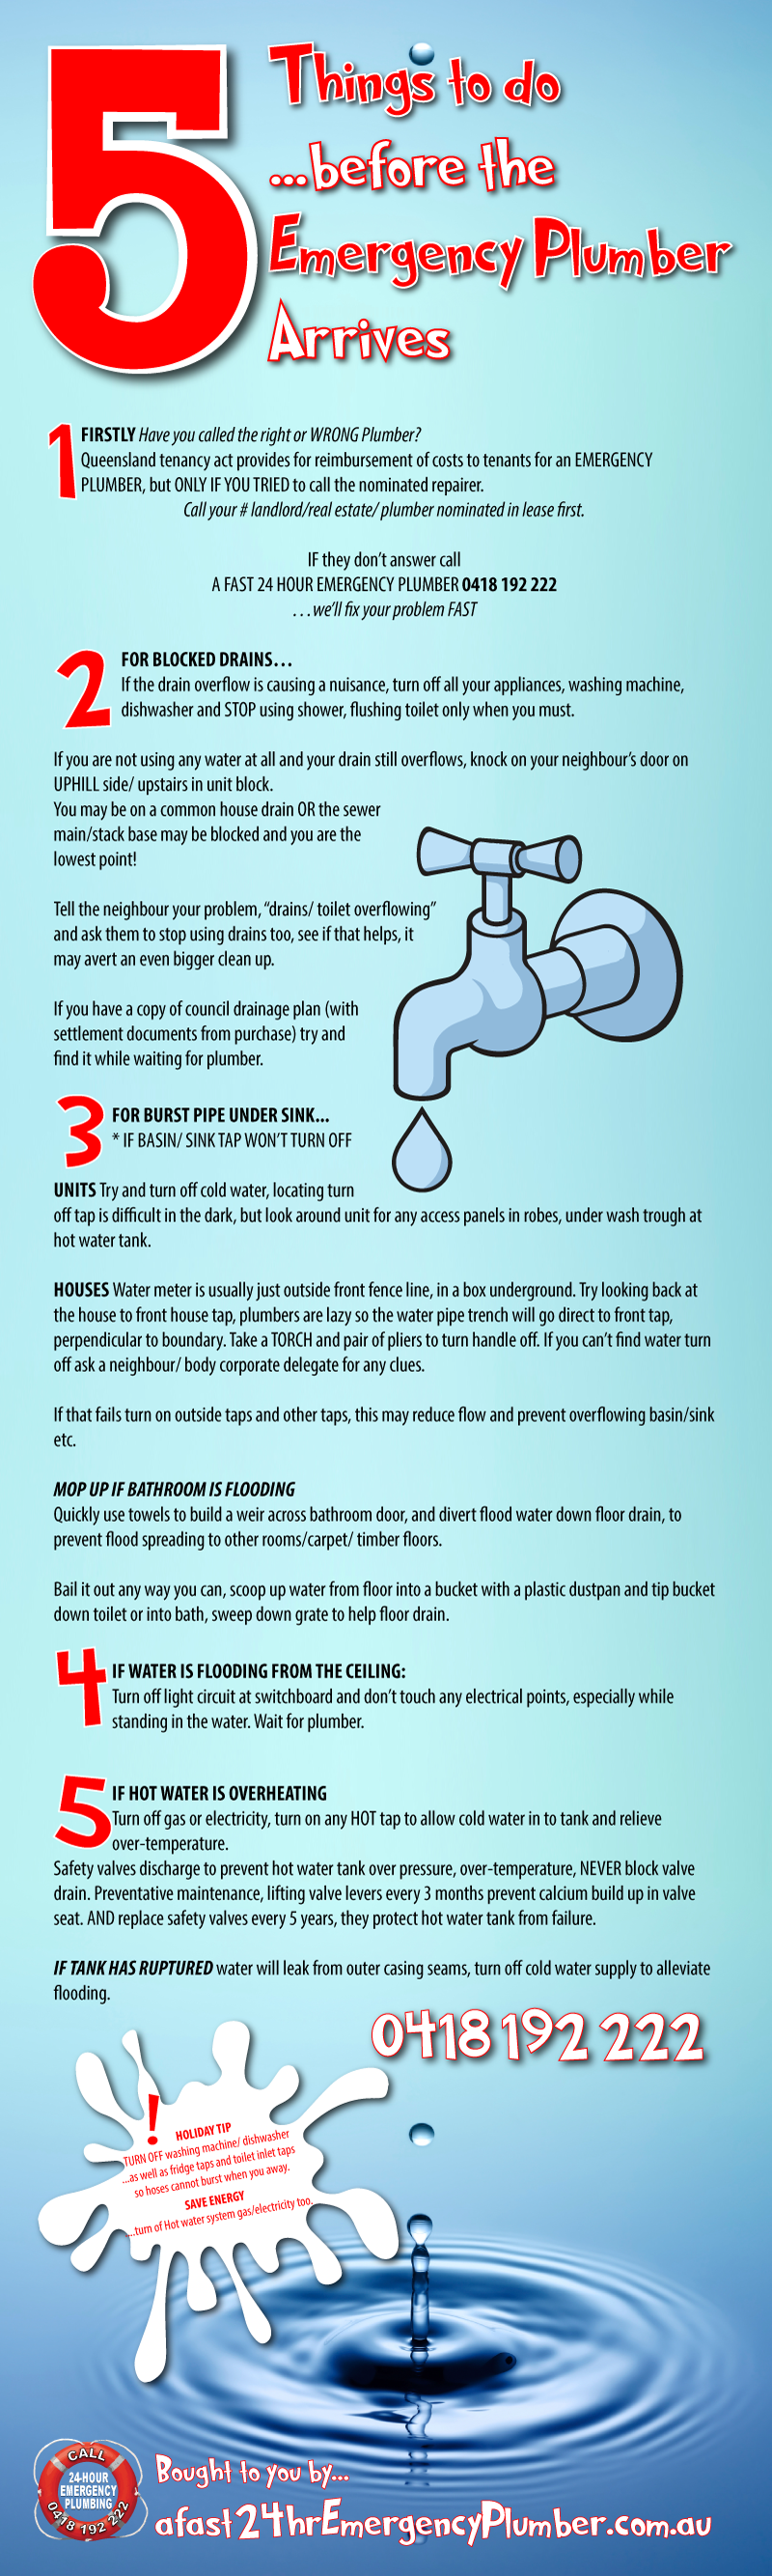 5 Things to do Before the Emergency Plumber Arrives